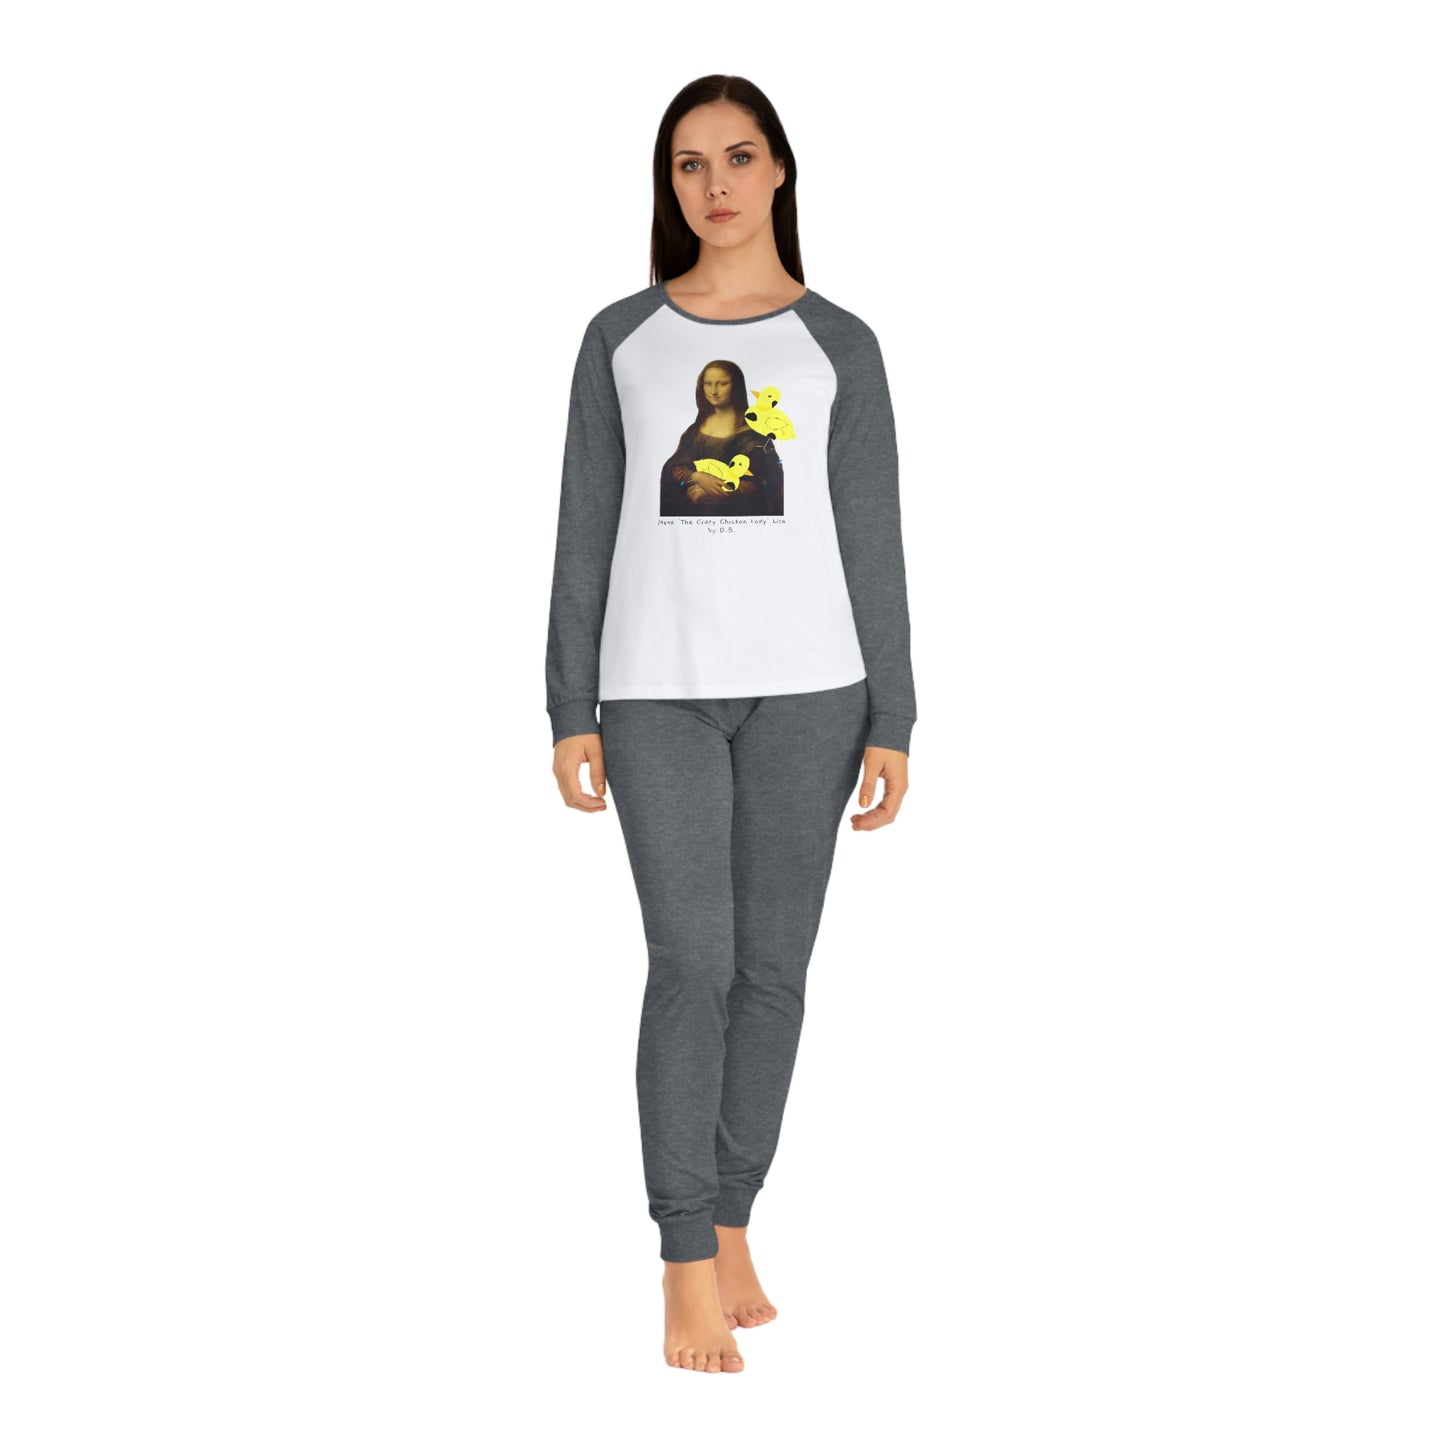 Pyjama's with Mona 'The Crazy Chicken Lady' Lisa print by D.B. (3 Colour Choices)